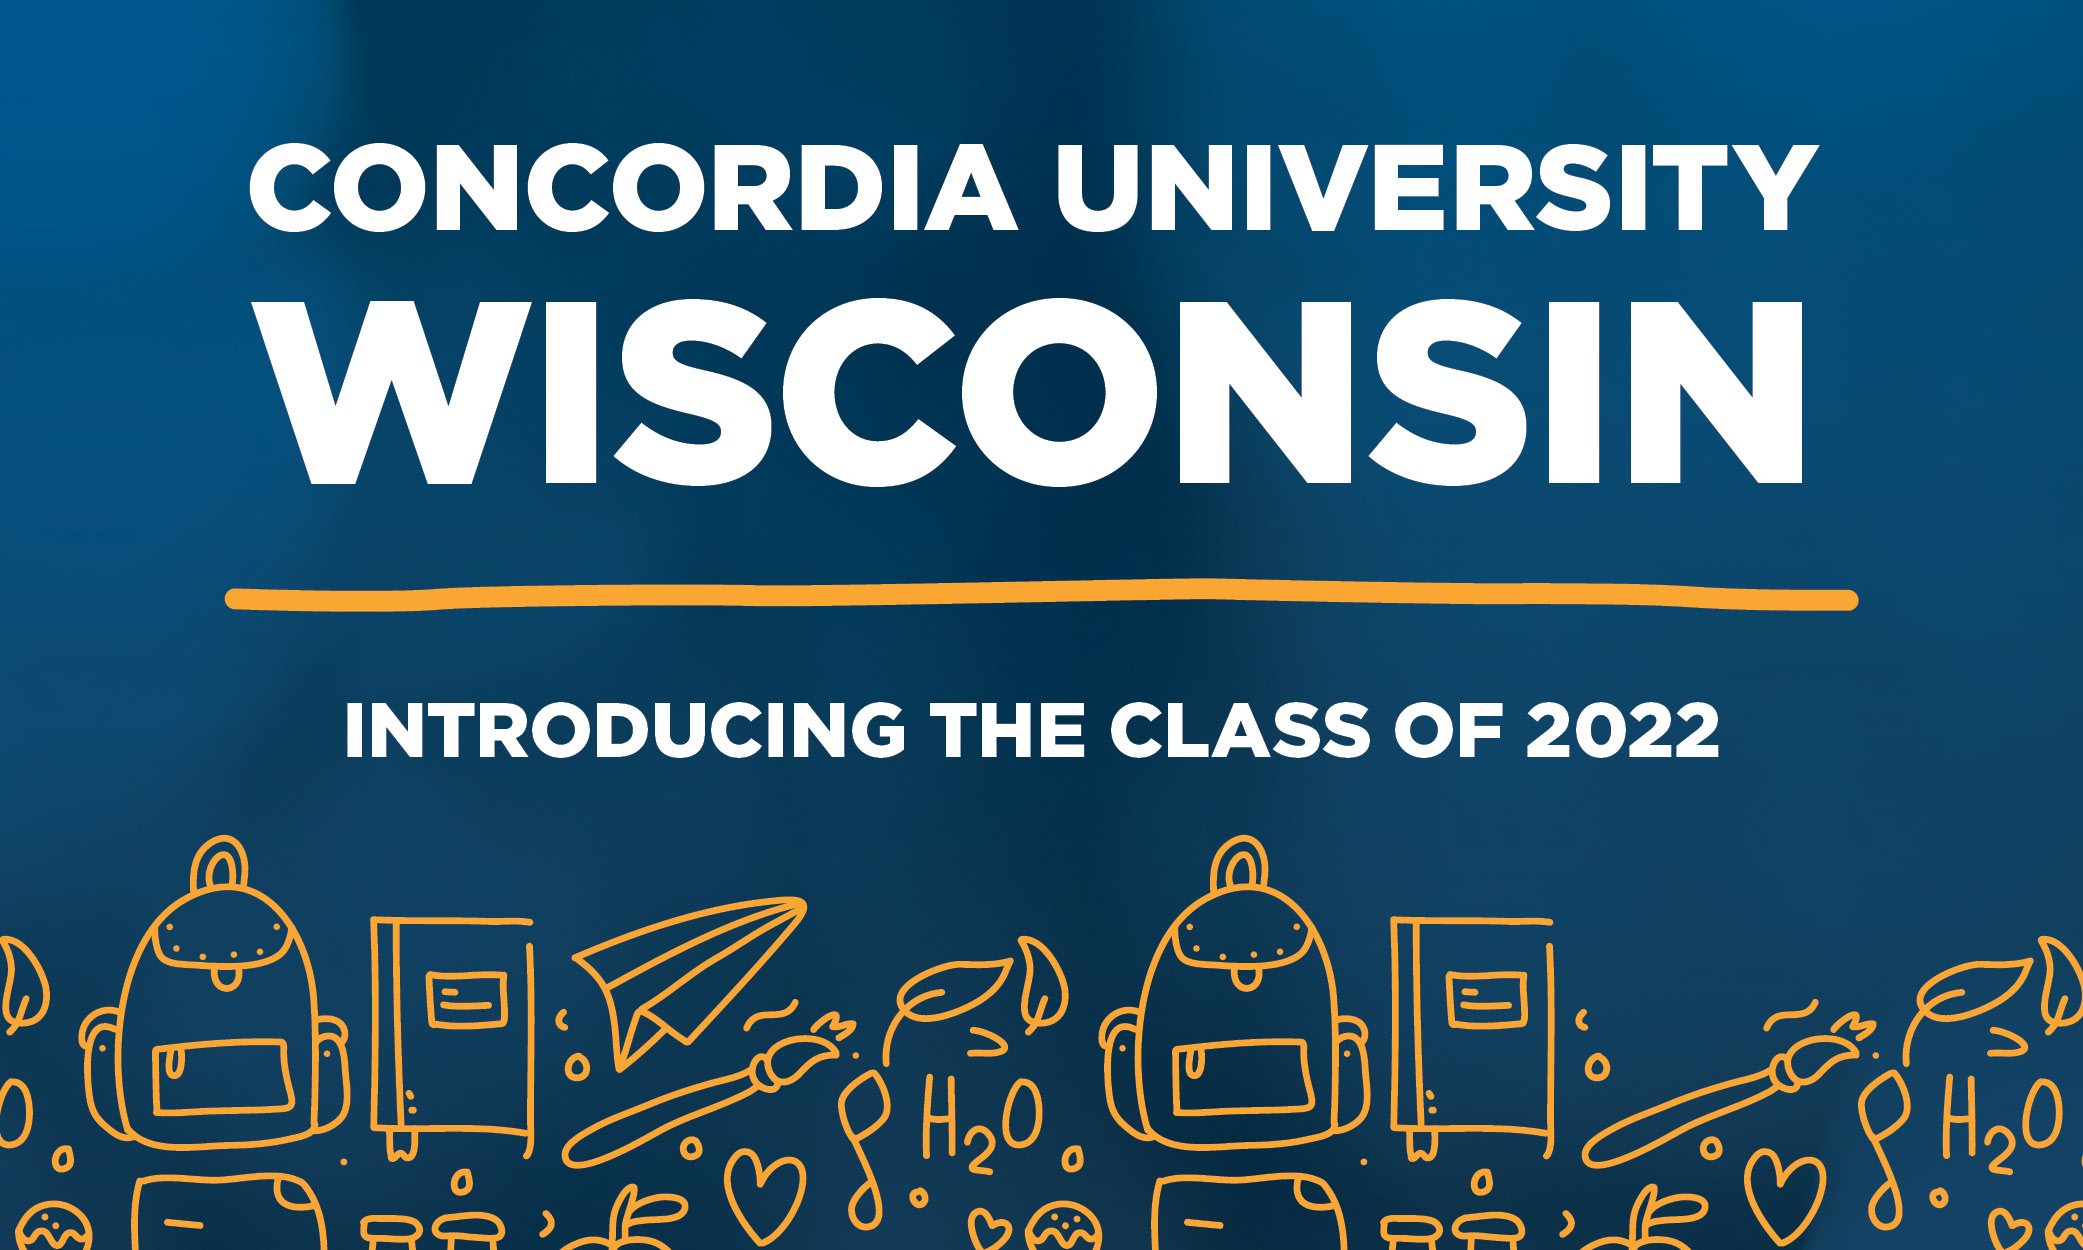 The front of CUW's official commencement booklet